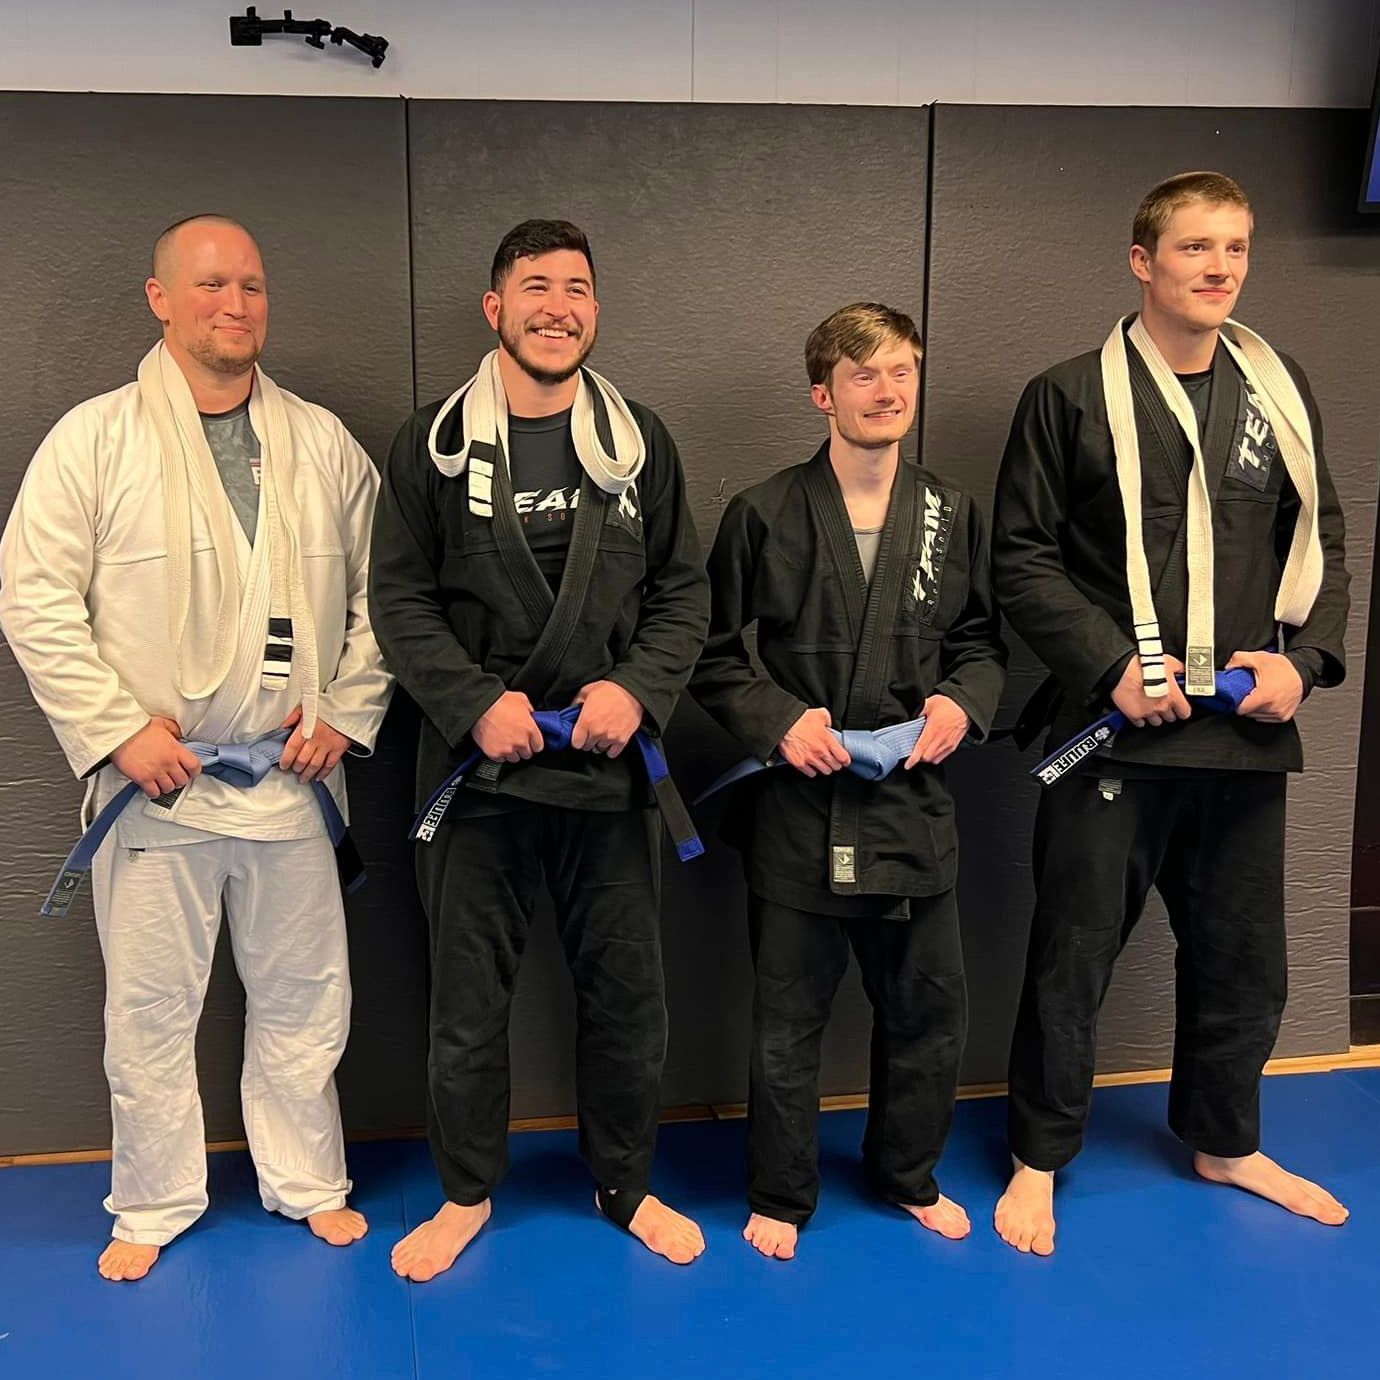 A group of men standing next to each other on a blue mat